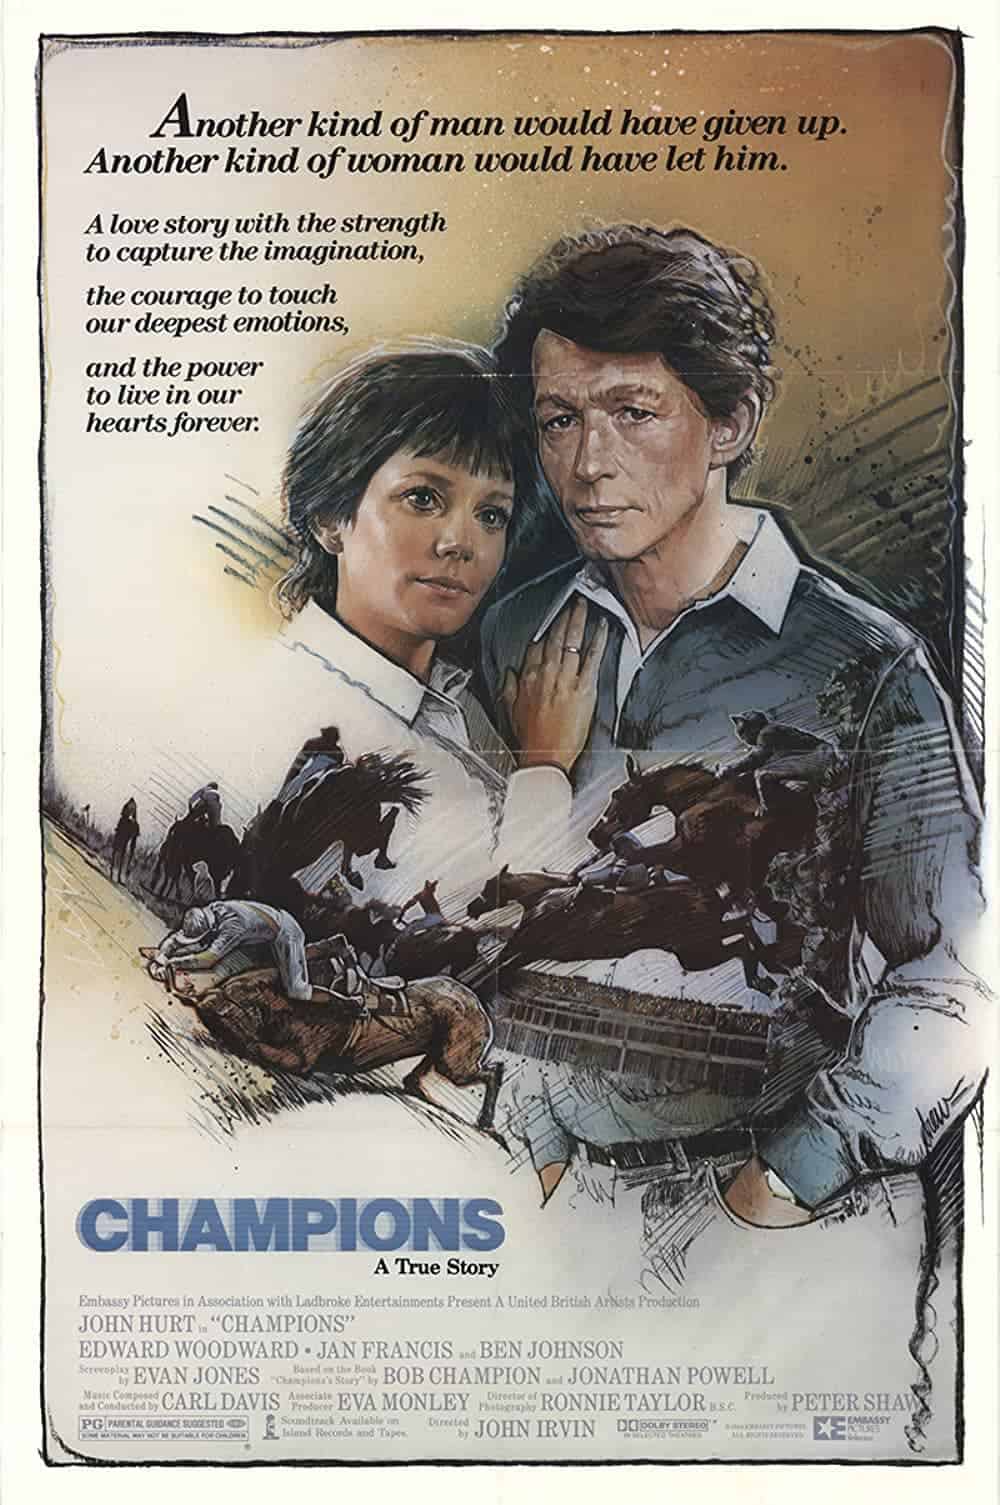 Champions (1984) Best Horse Racing Movies to Feel The Life